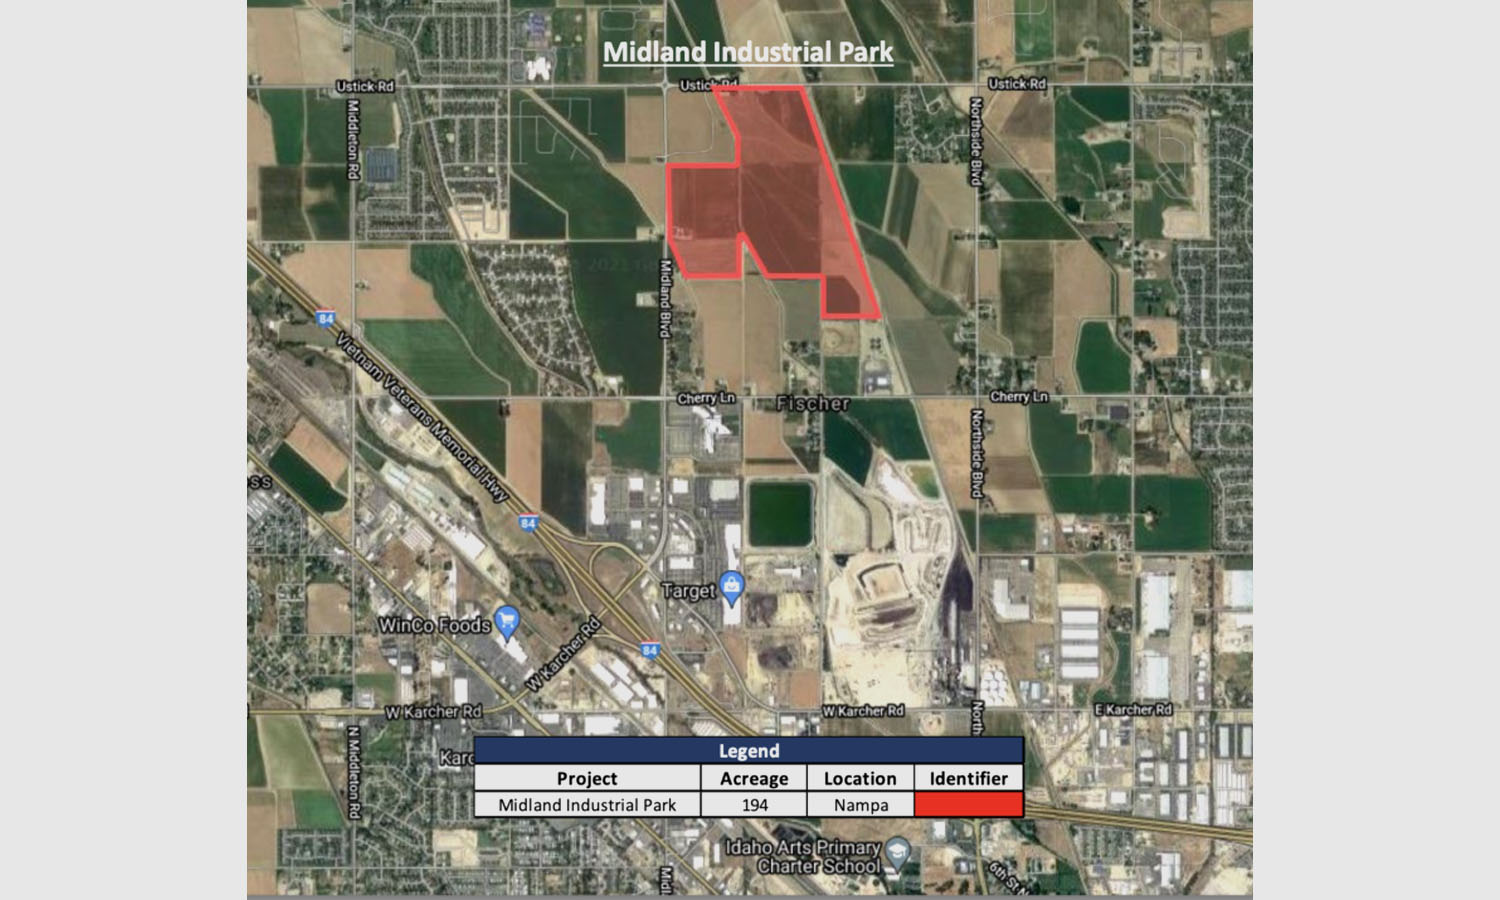 Large New Industrial Park Planned for North Nampa, Idaho